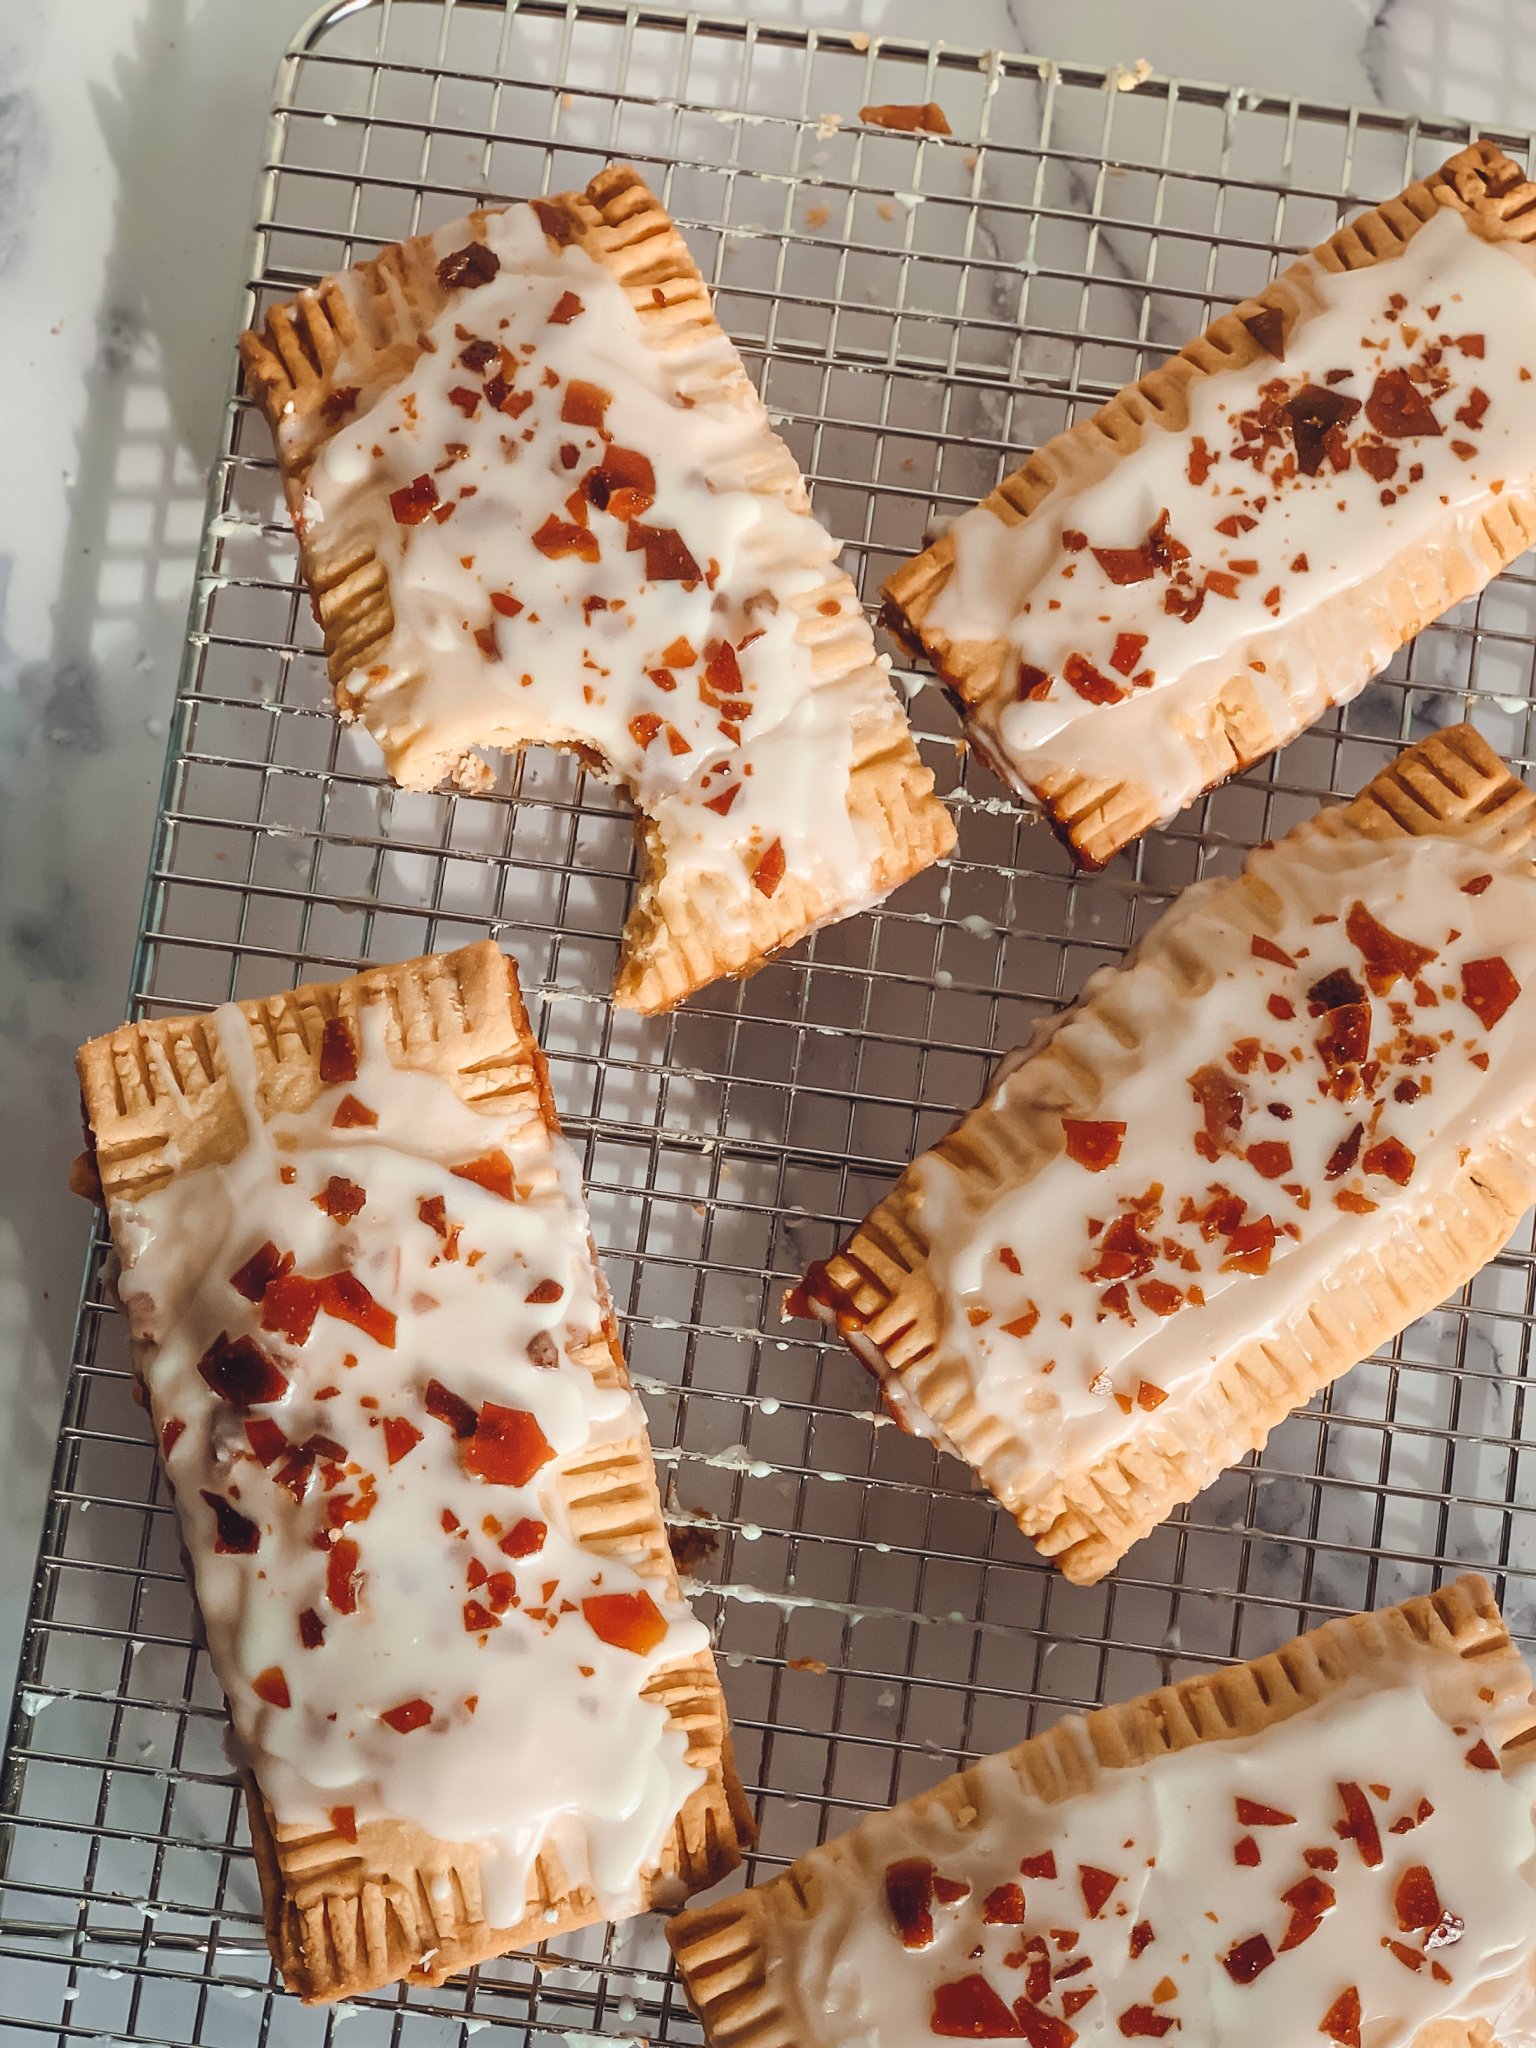 Chocolate Maple Pop Tarts with Cocoa Bean Infused Maple Syrup by Runamok Maple